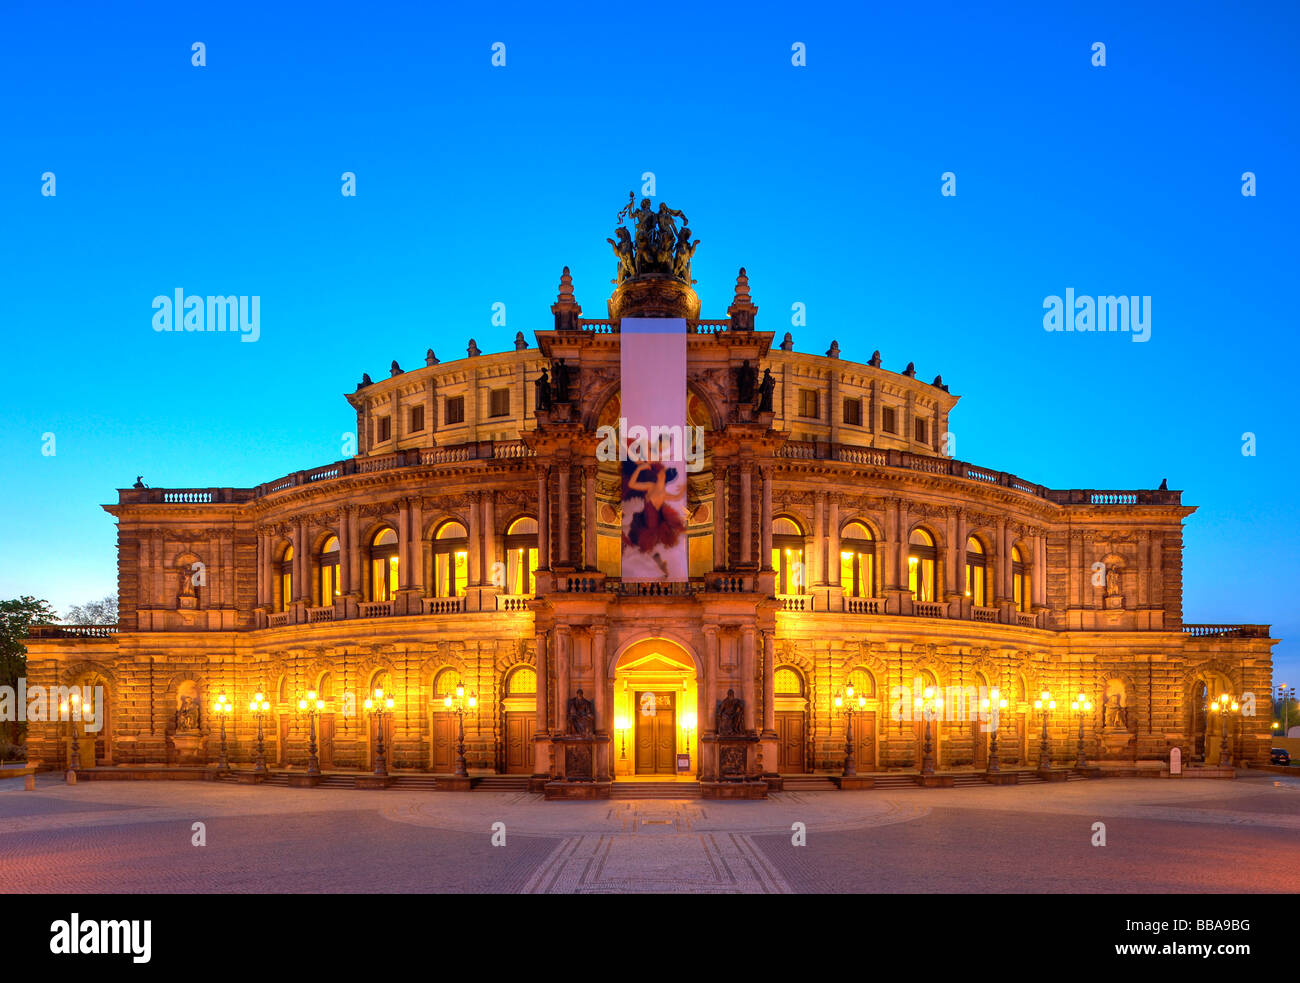 Semperoper Opera house with flags and illuminated at night, Theaterplatz square, Dresden, Free State of Saxony, Germany, Europe Stock Photo